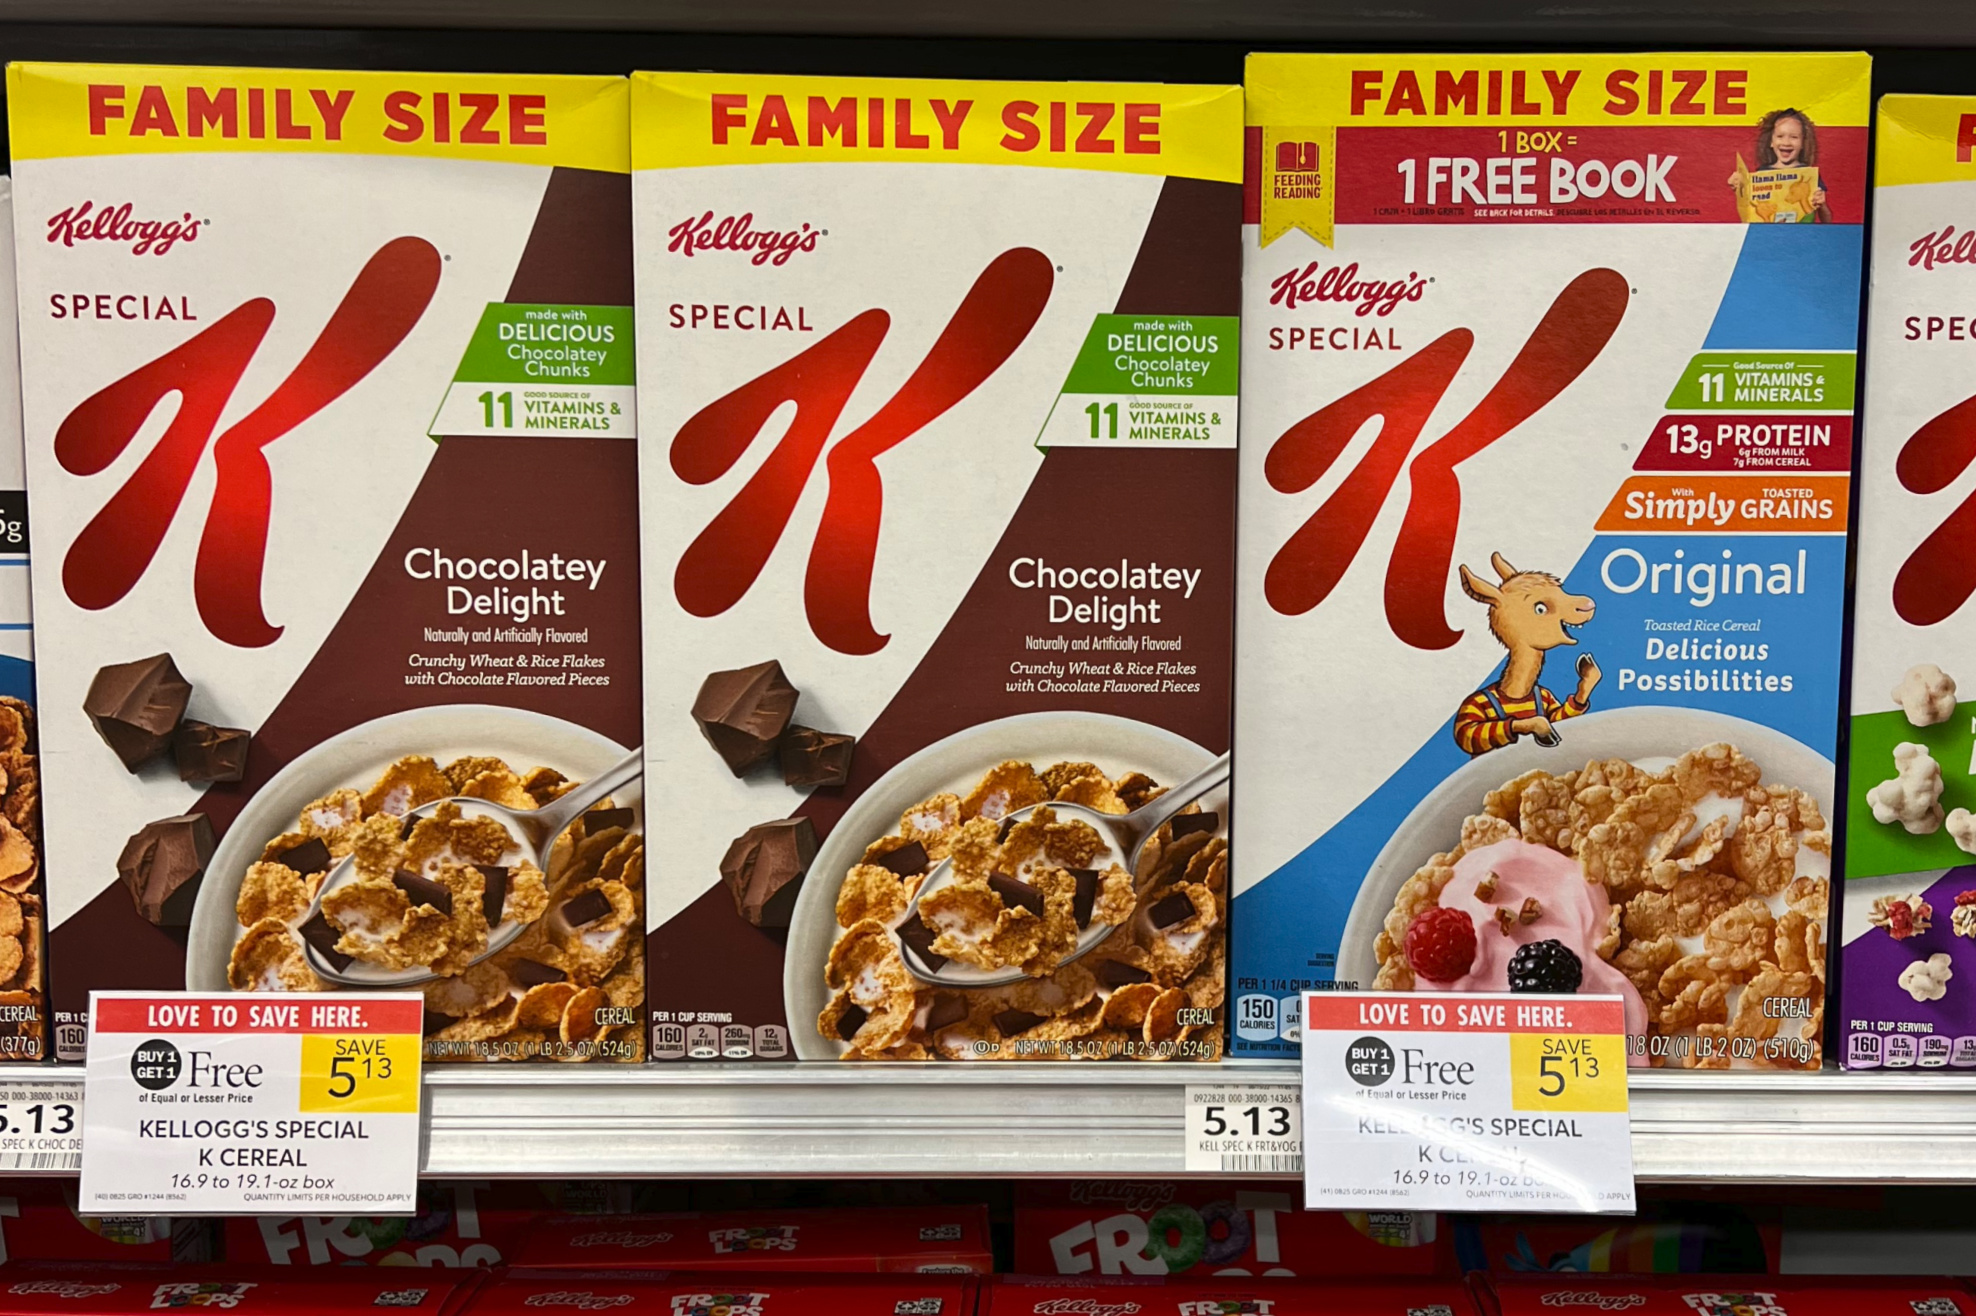 get-the-family-size-boxes-of-kellogg-s-special-k-cereal-for-as-low-as